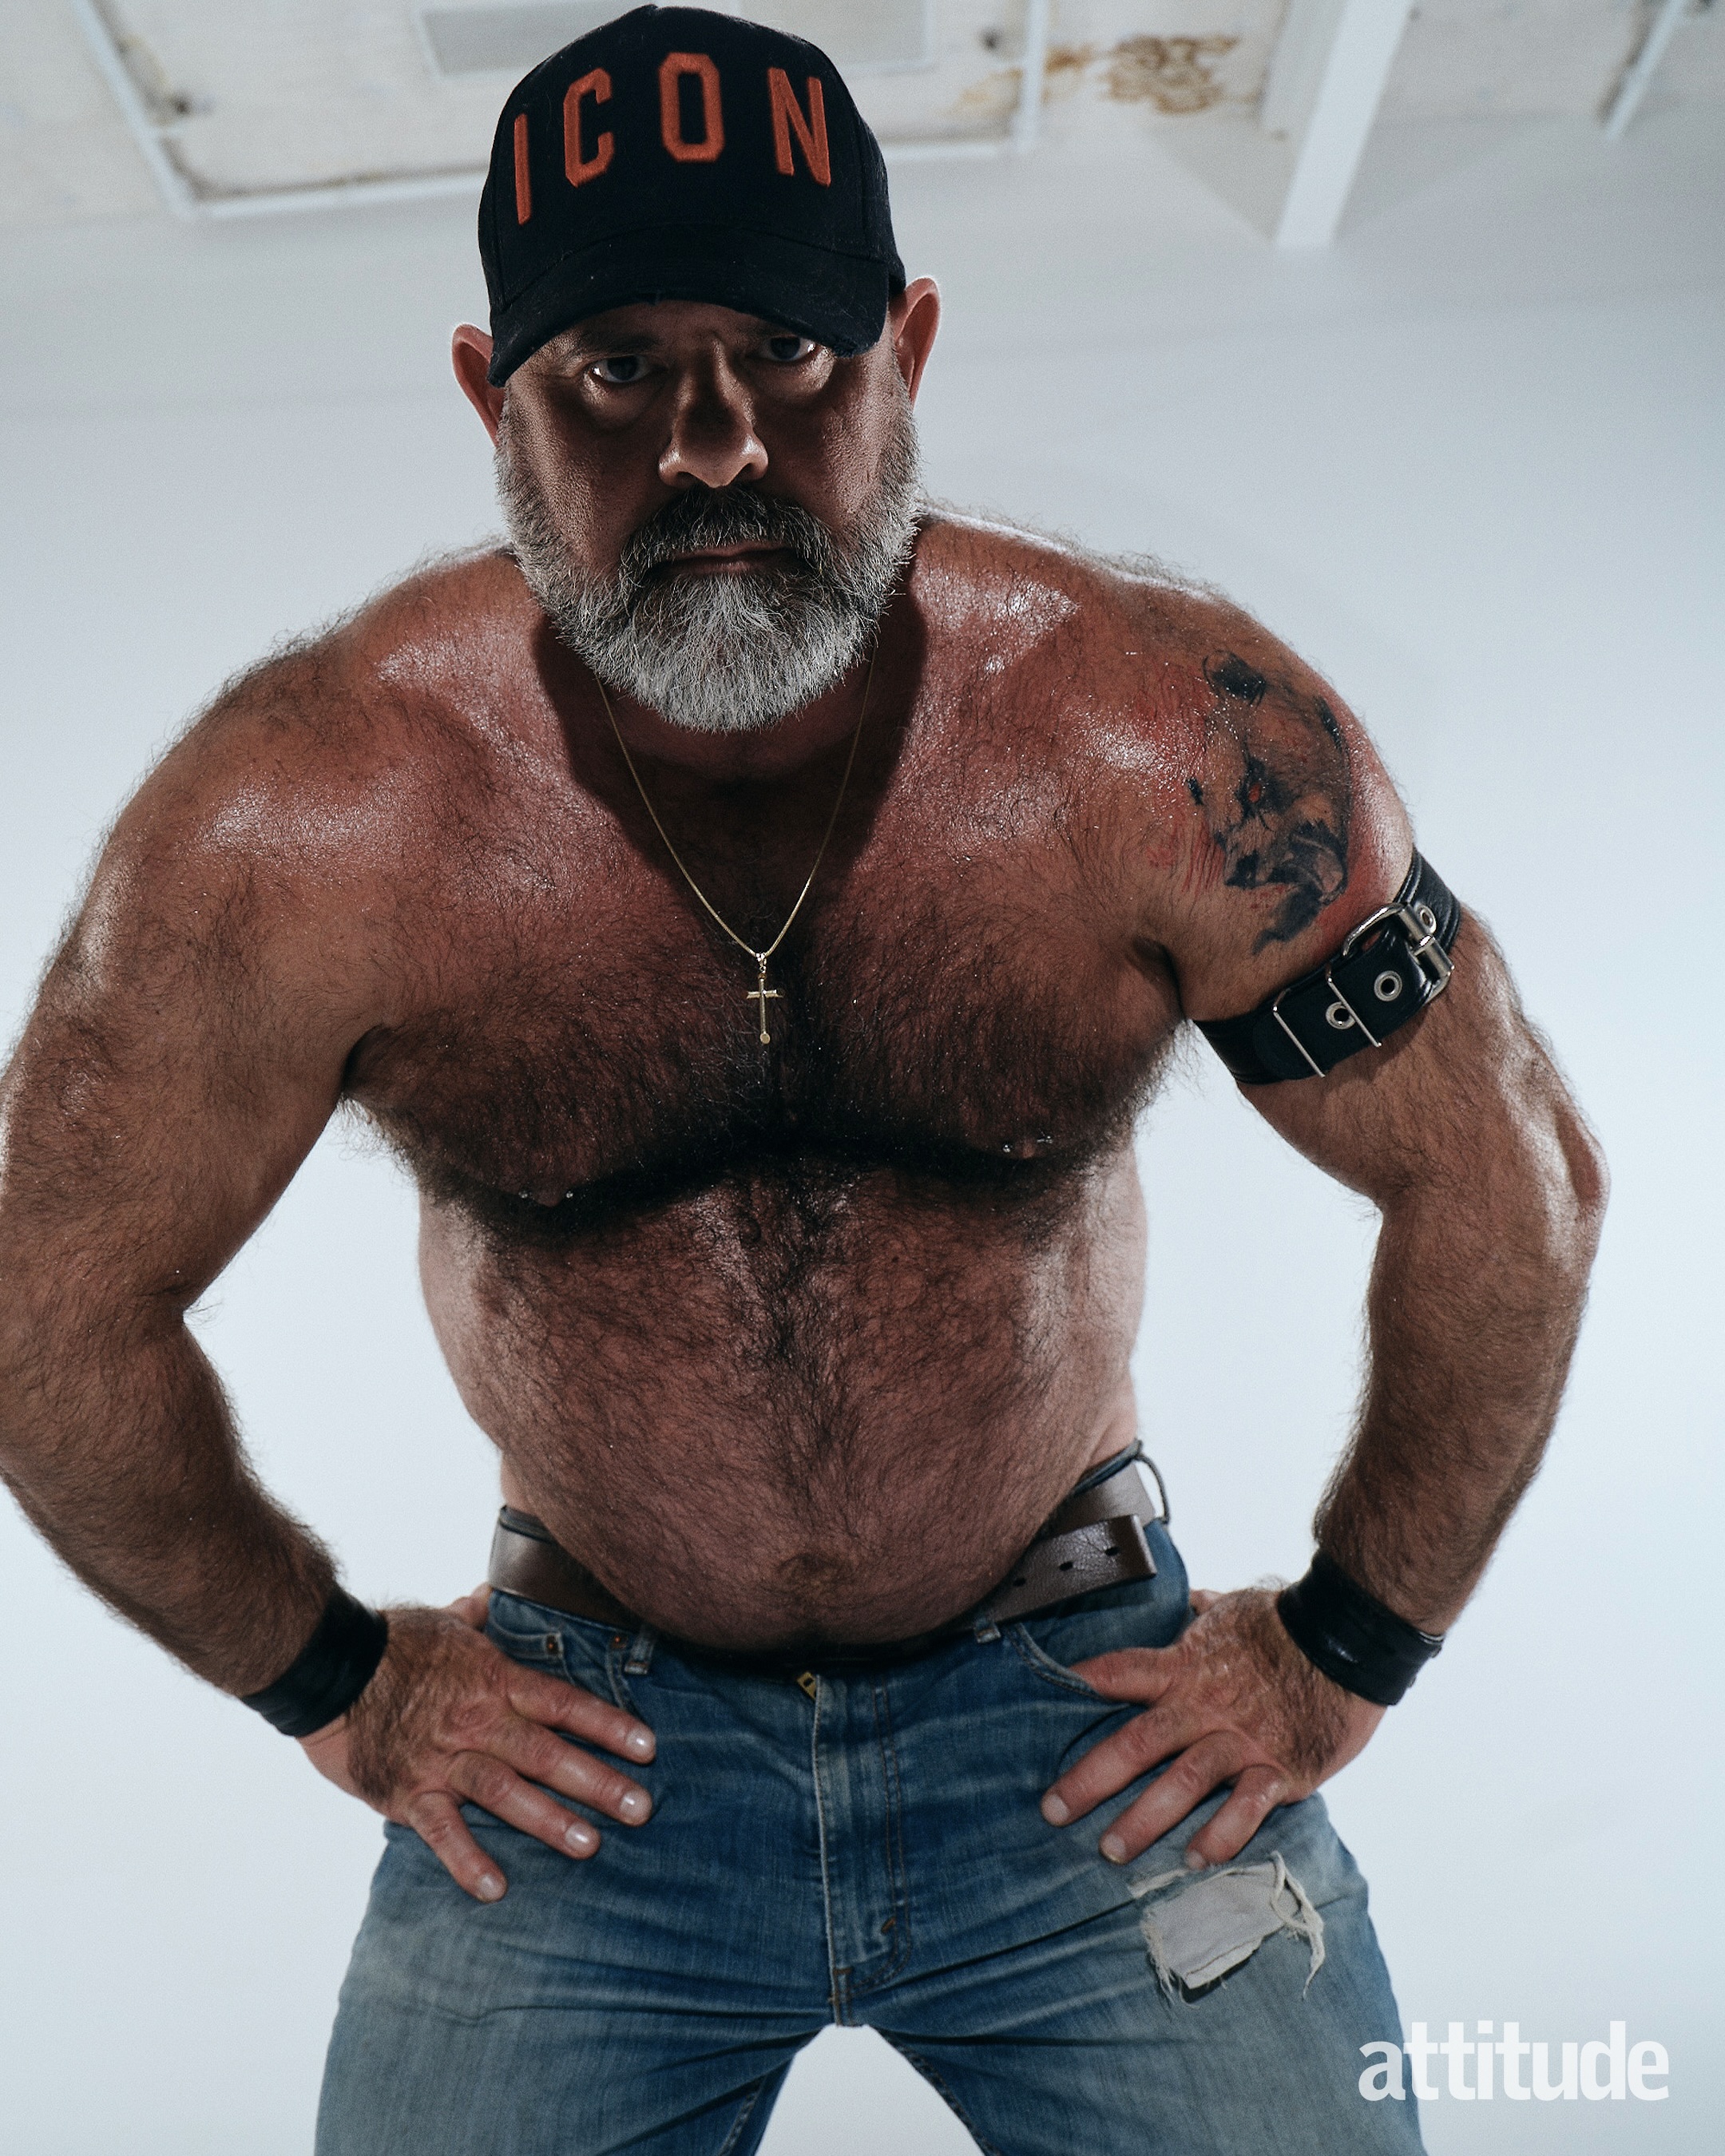 andrew choi recommends hairy muscle bears pic